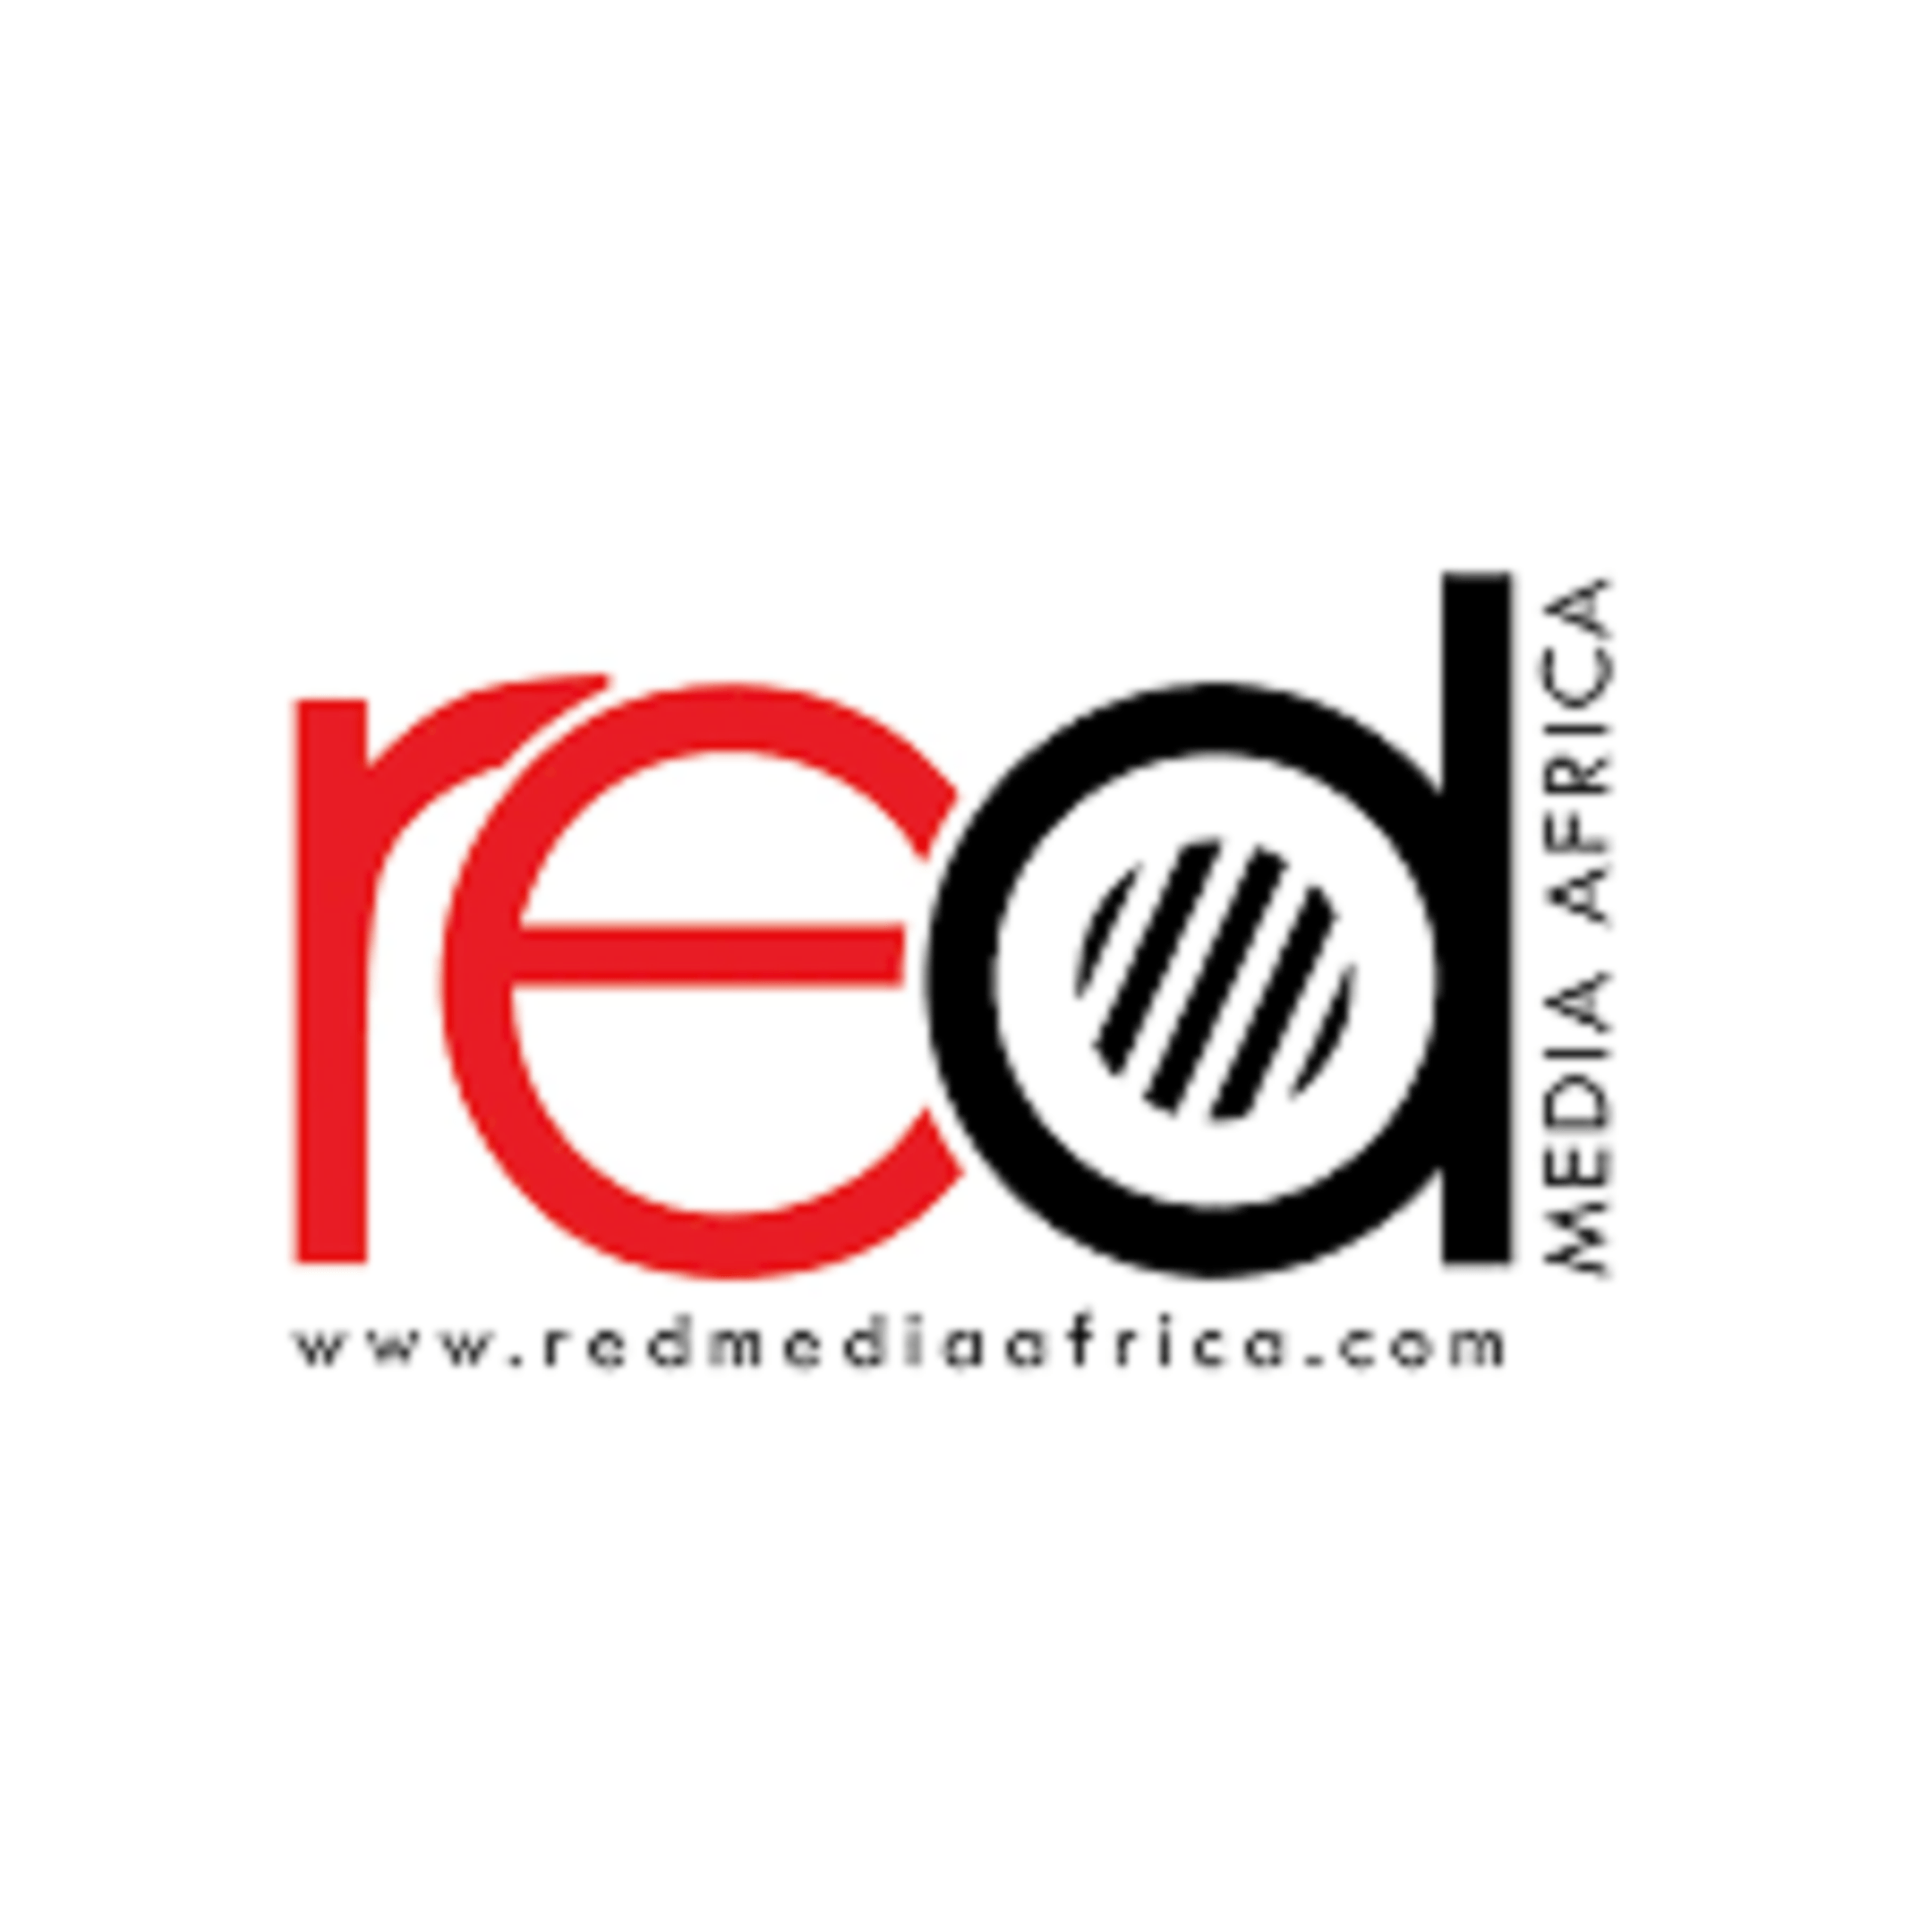 Profile with Red Oval Logo - Supporter Profile: Red Media Africa (Media Support) – AMFEST EXPO